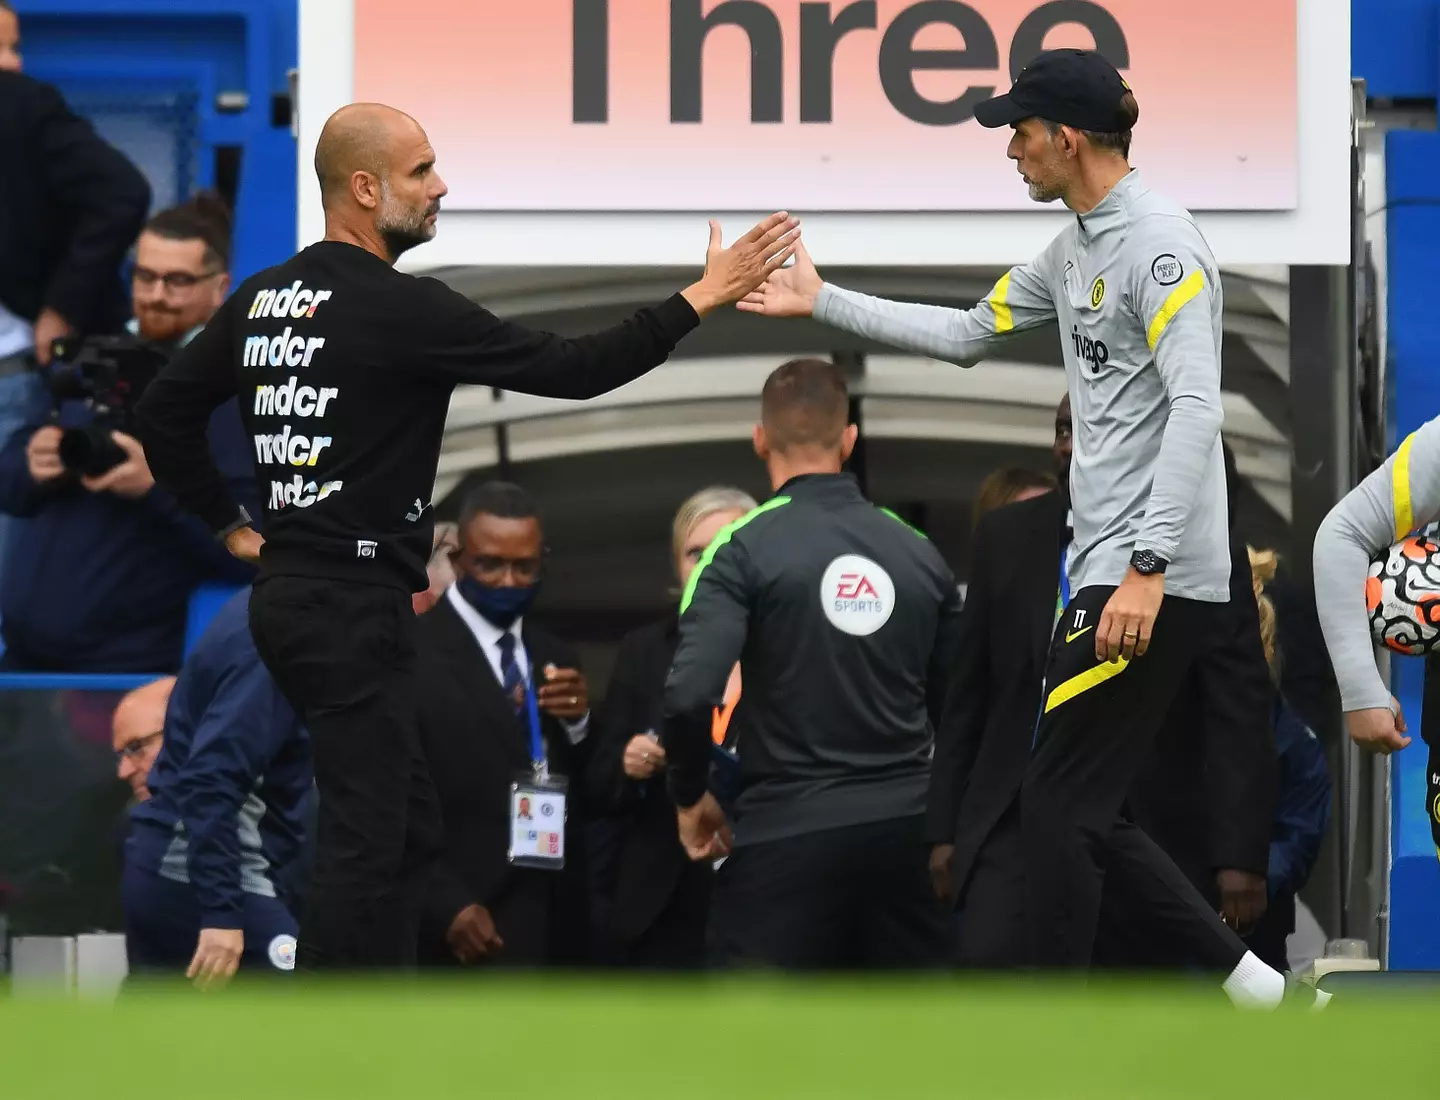 Thomas Tuchel and Pep Guardiola shake hands at the end of the match. (Alamy)